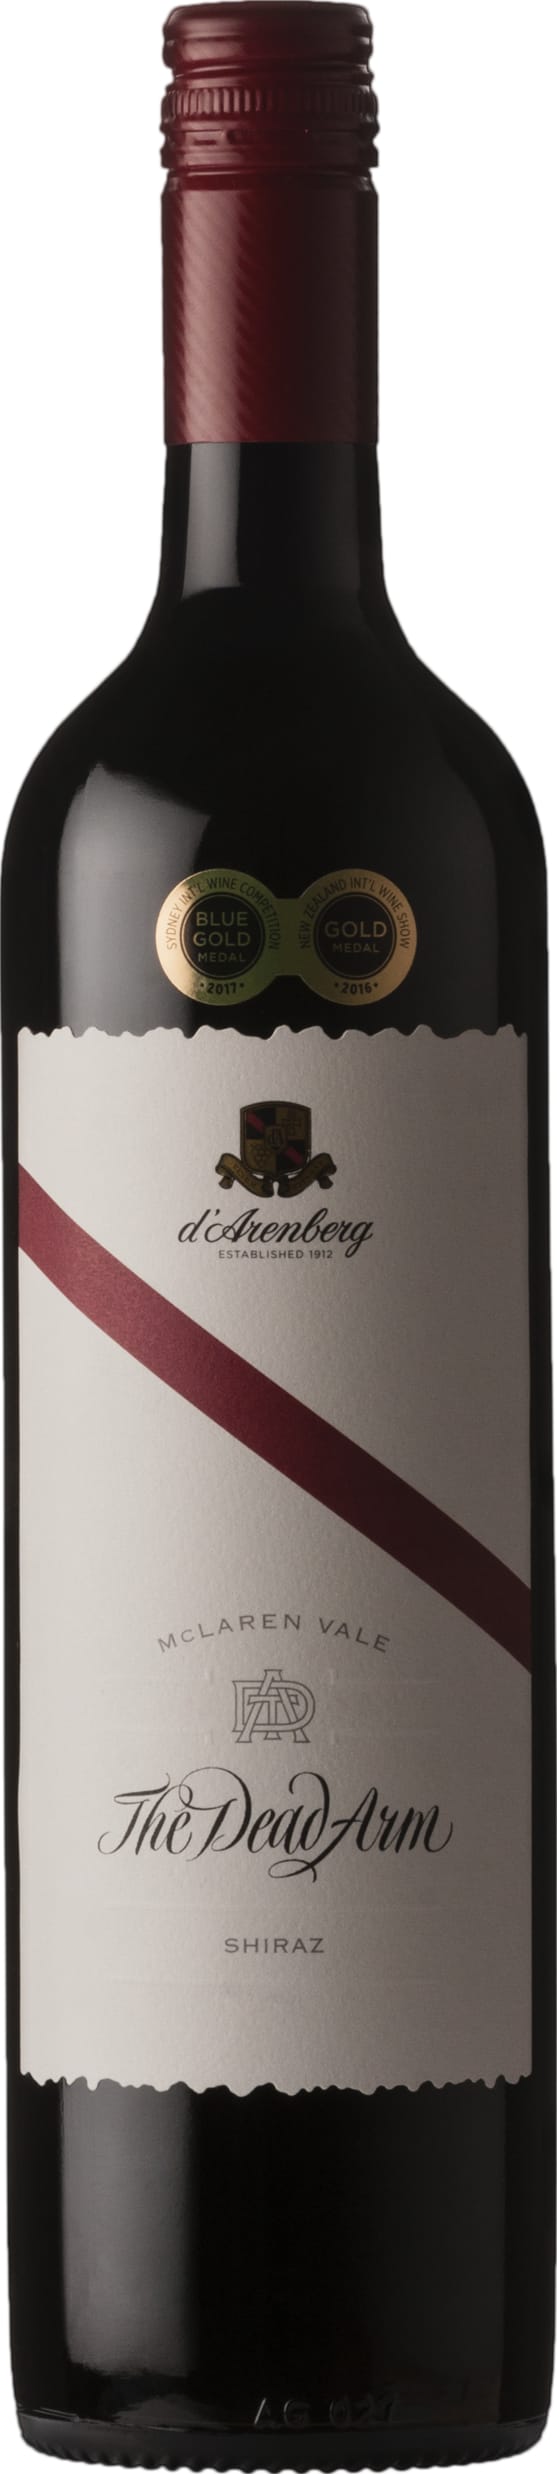 D Arenberg The Dead Arm Shiraz 2018 75cl - Buy D Arenberg Wines from GREAT WINES DIRECT wine shop